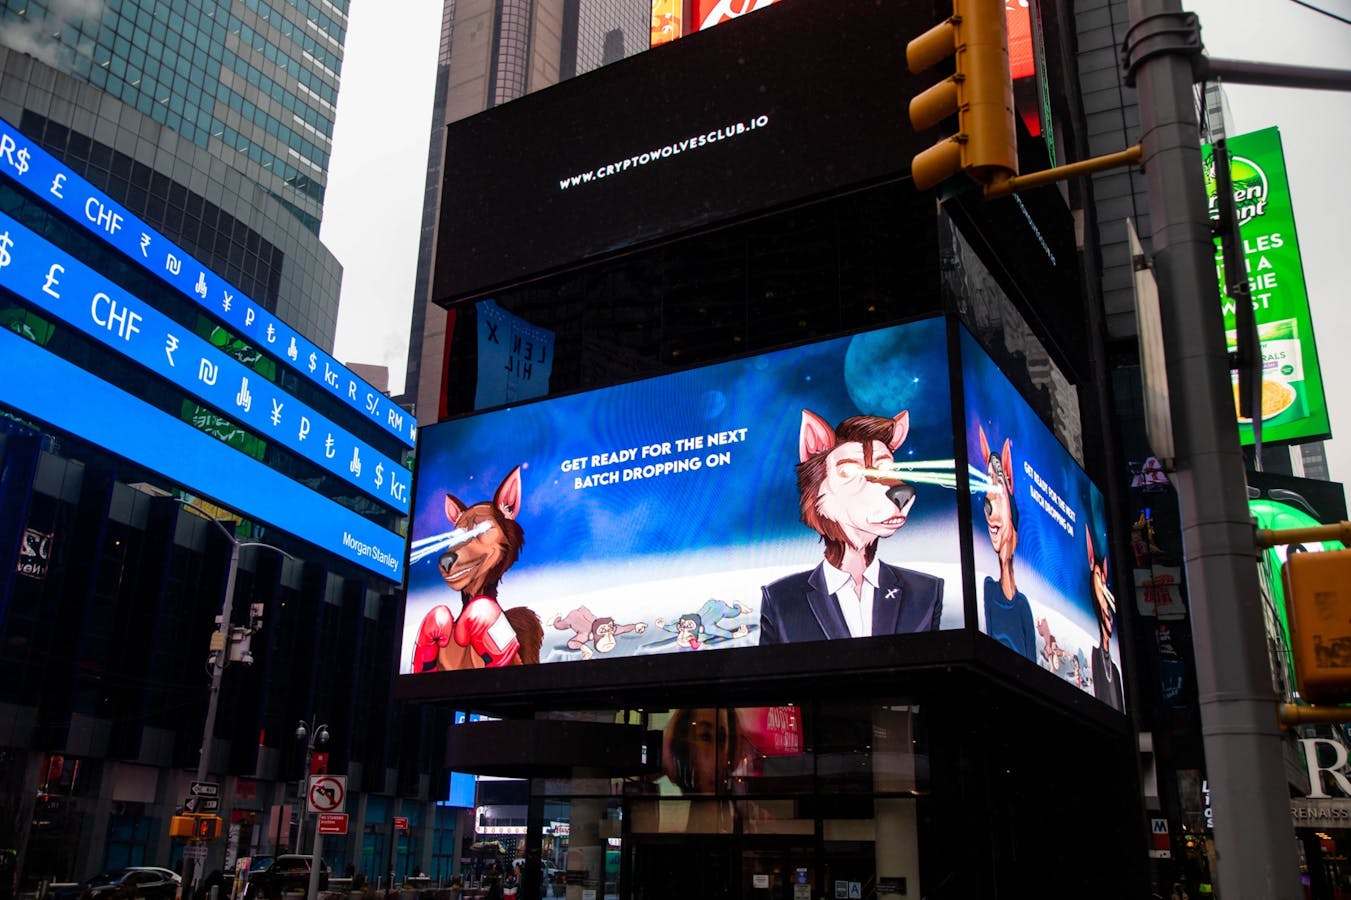 An advertisement for Crytpo Wolves Club NFT in Times Square, New York. Photo: Bloomberg